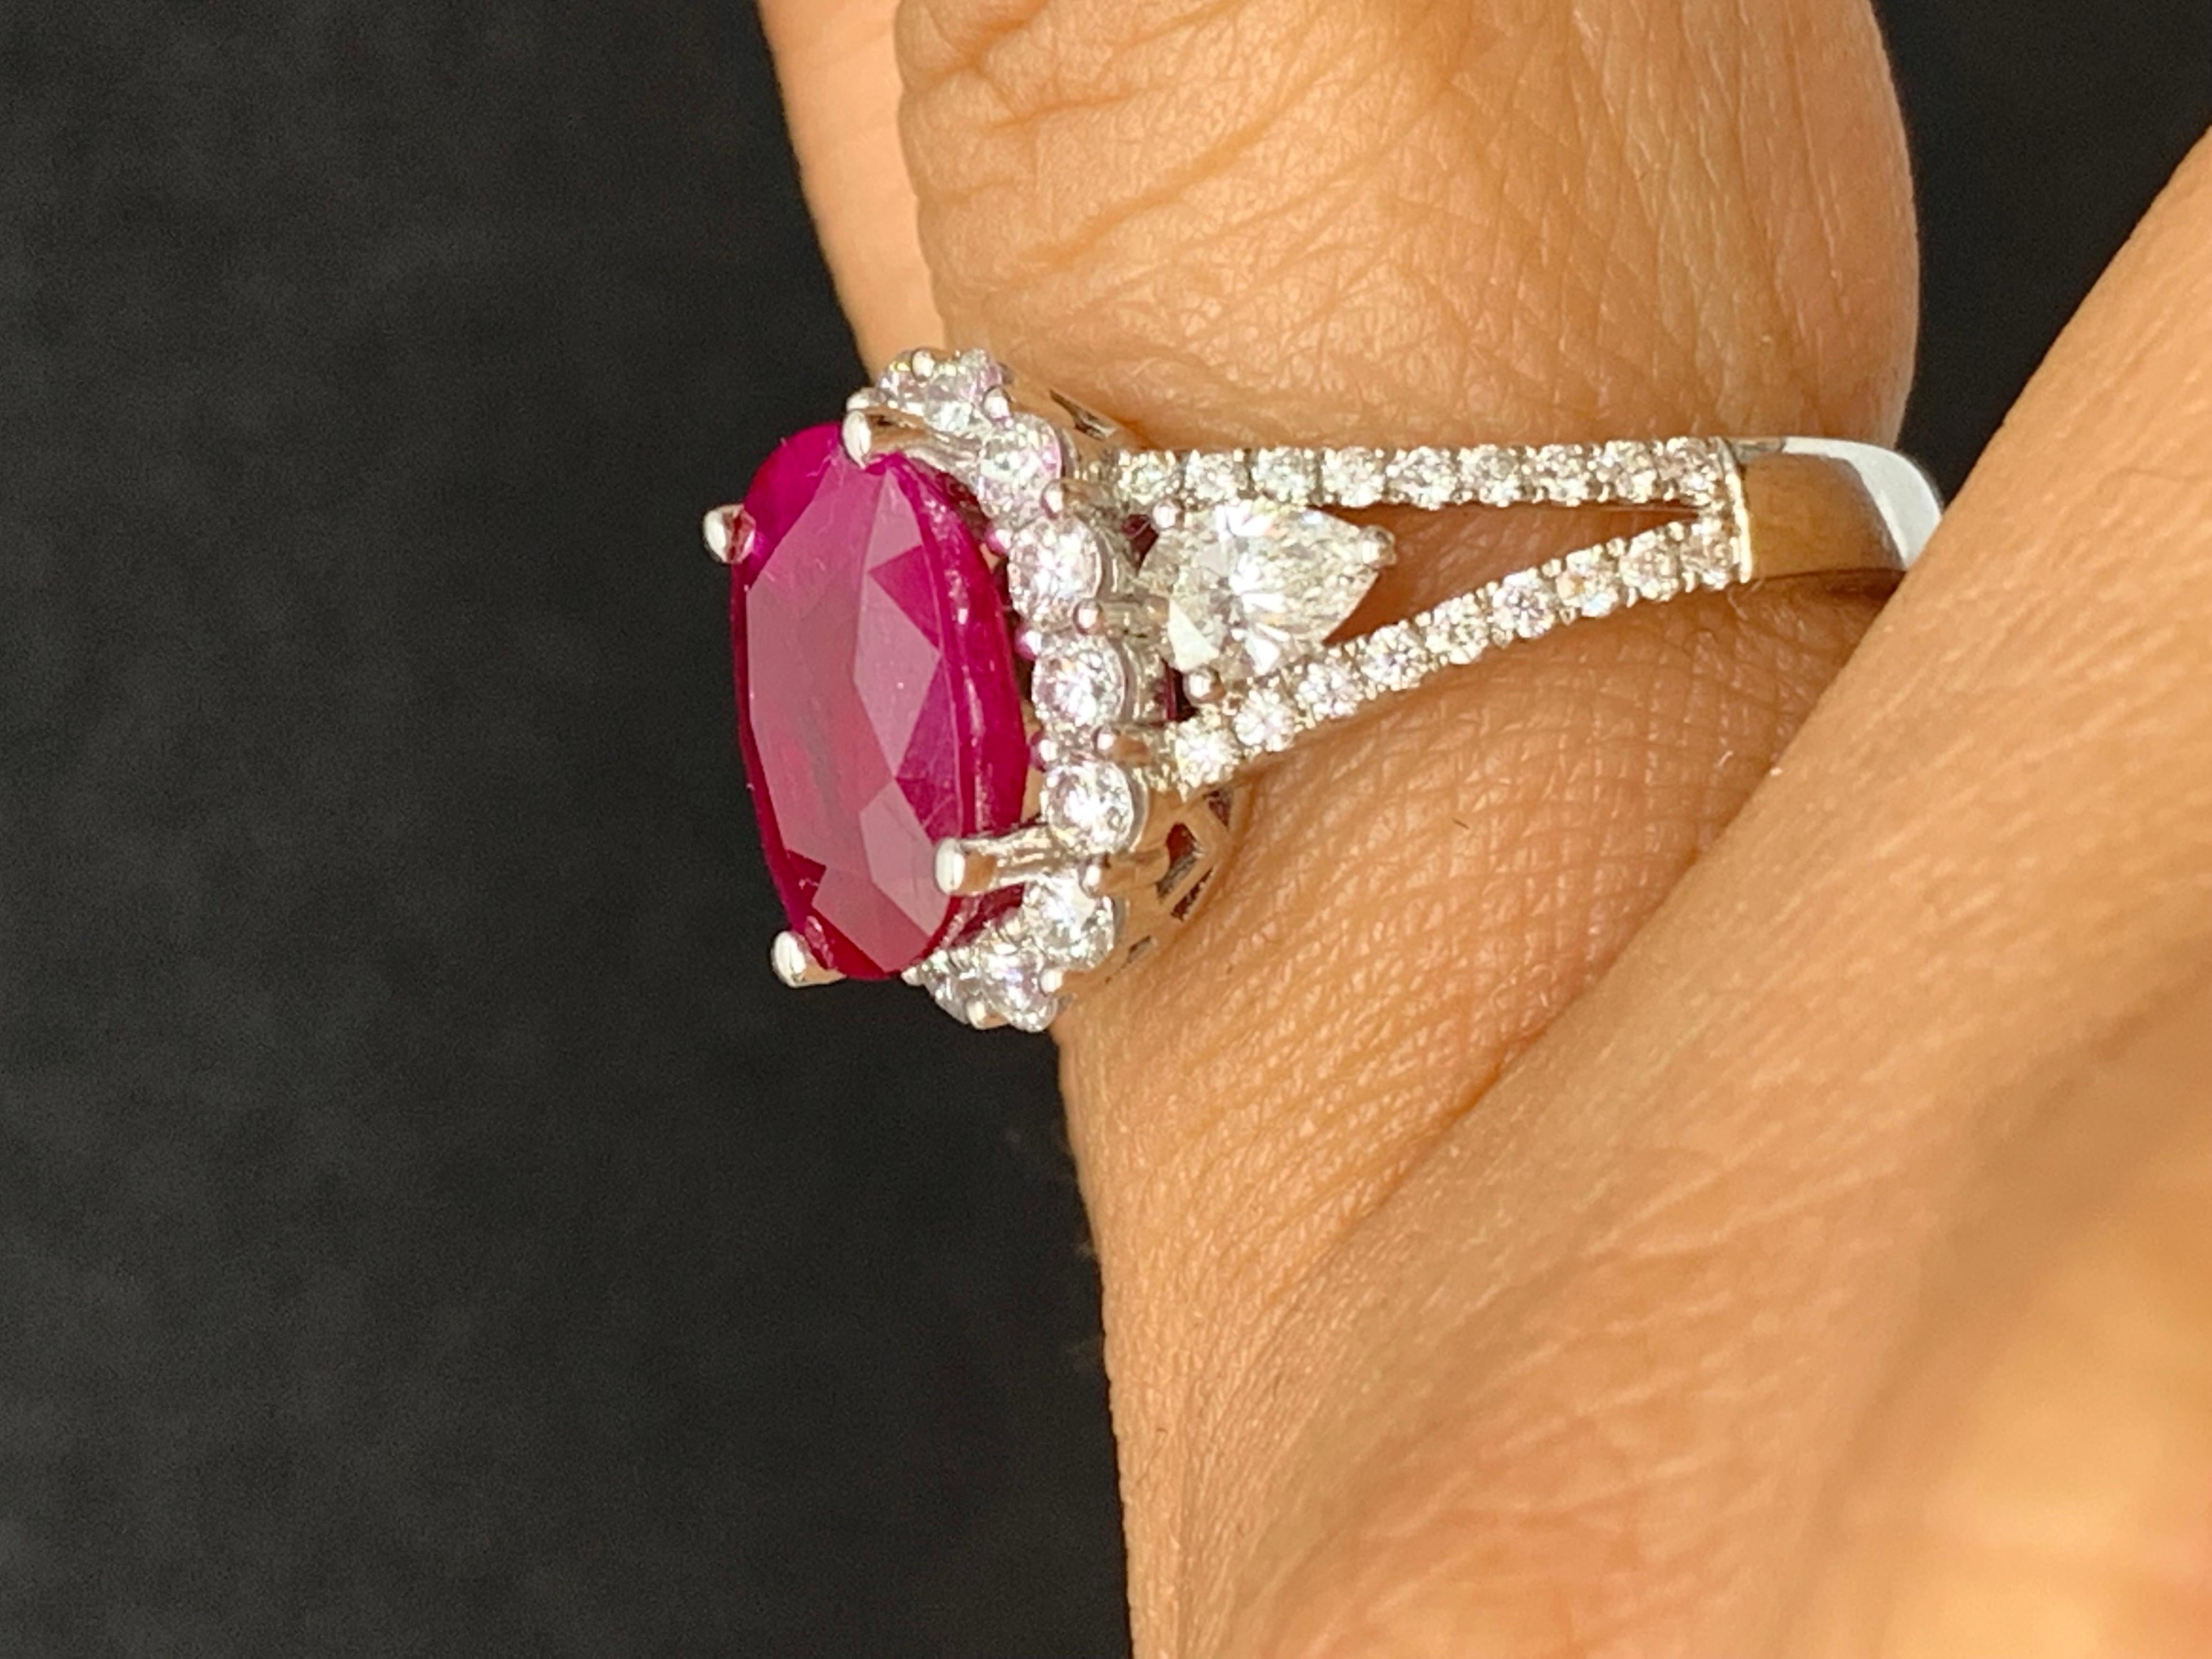 3.58 Carat Oval Cut Ruby and Diamond Halo Ring in 18K White Gold For Sale 4